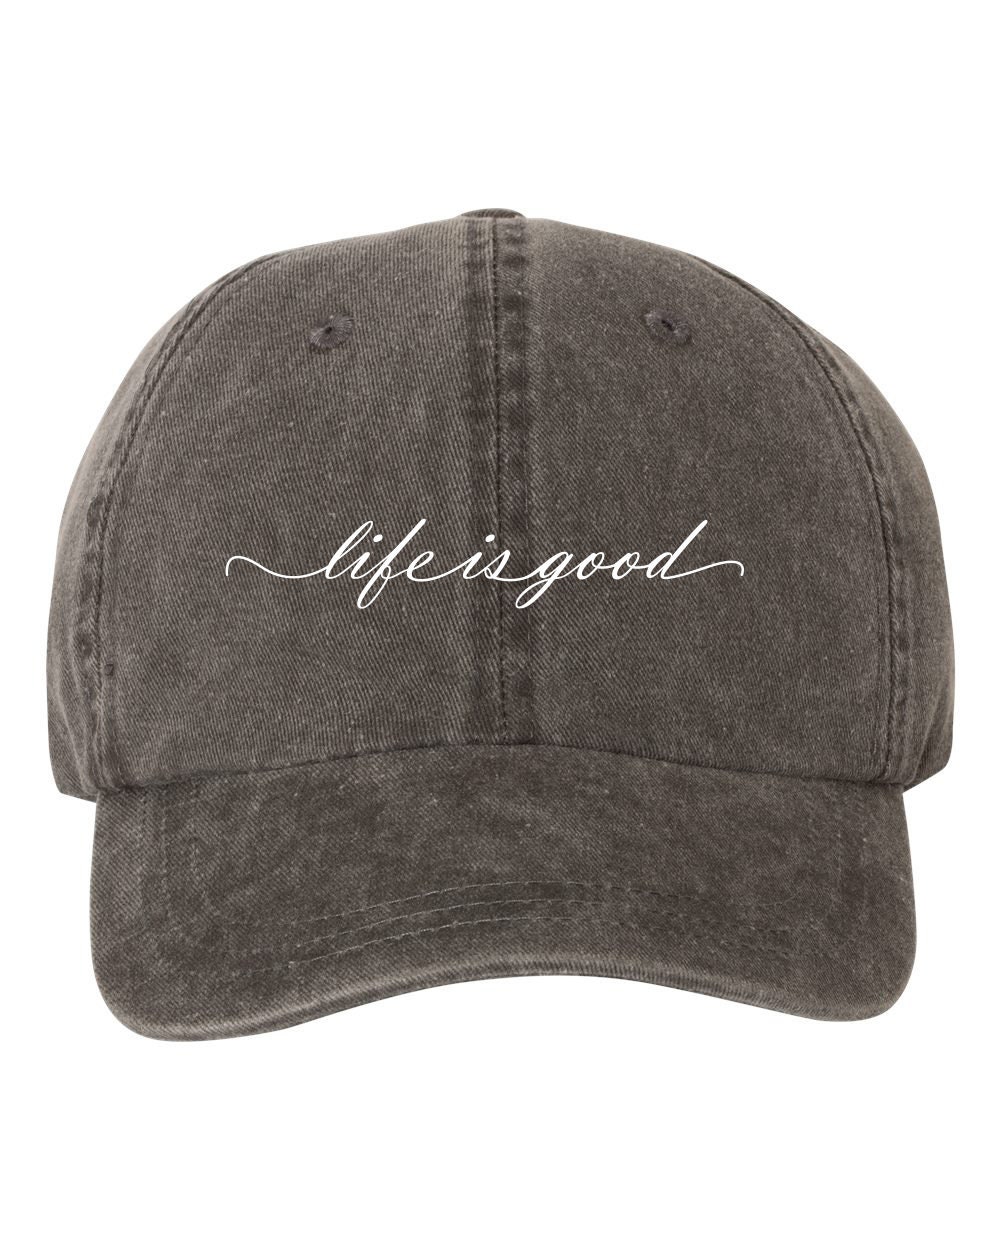 Life is Good Hat 